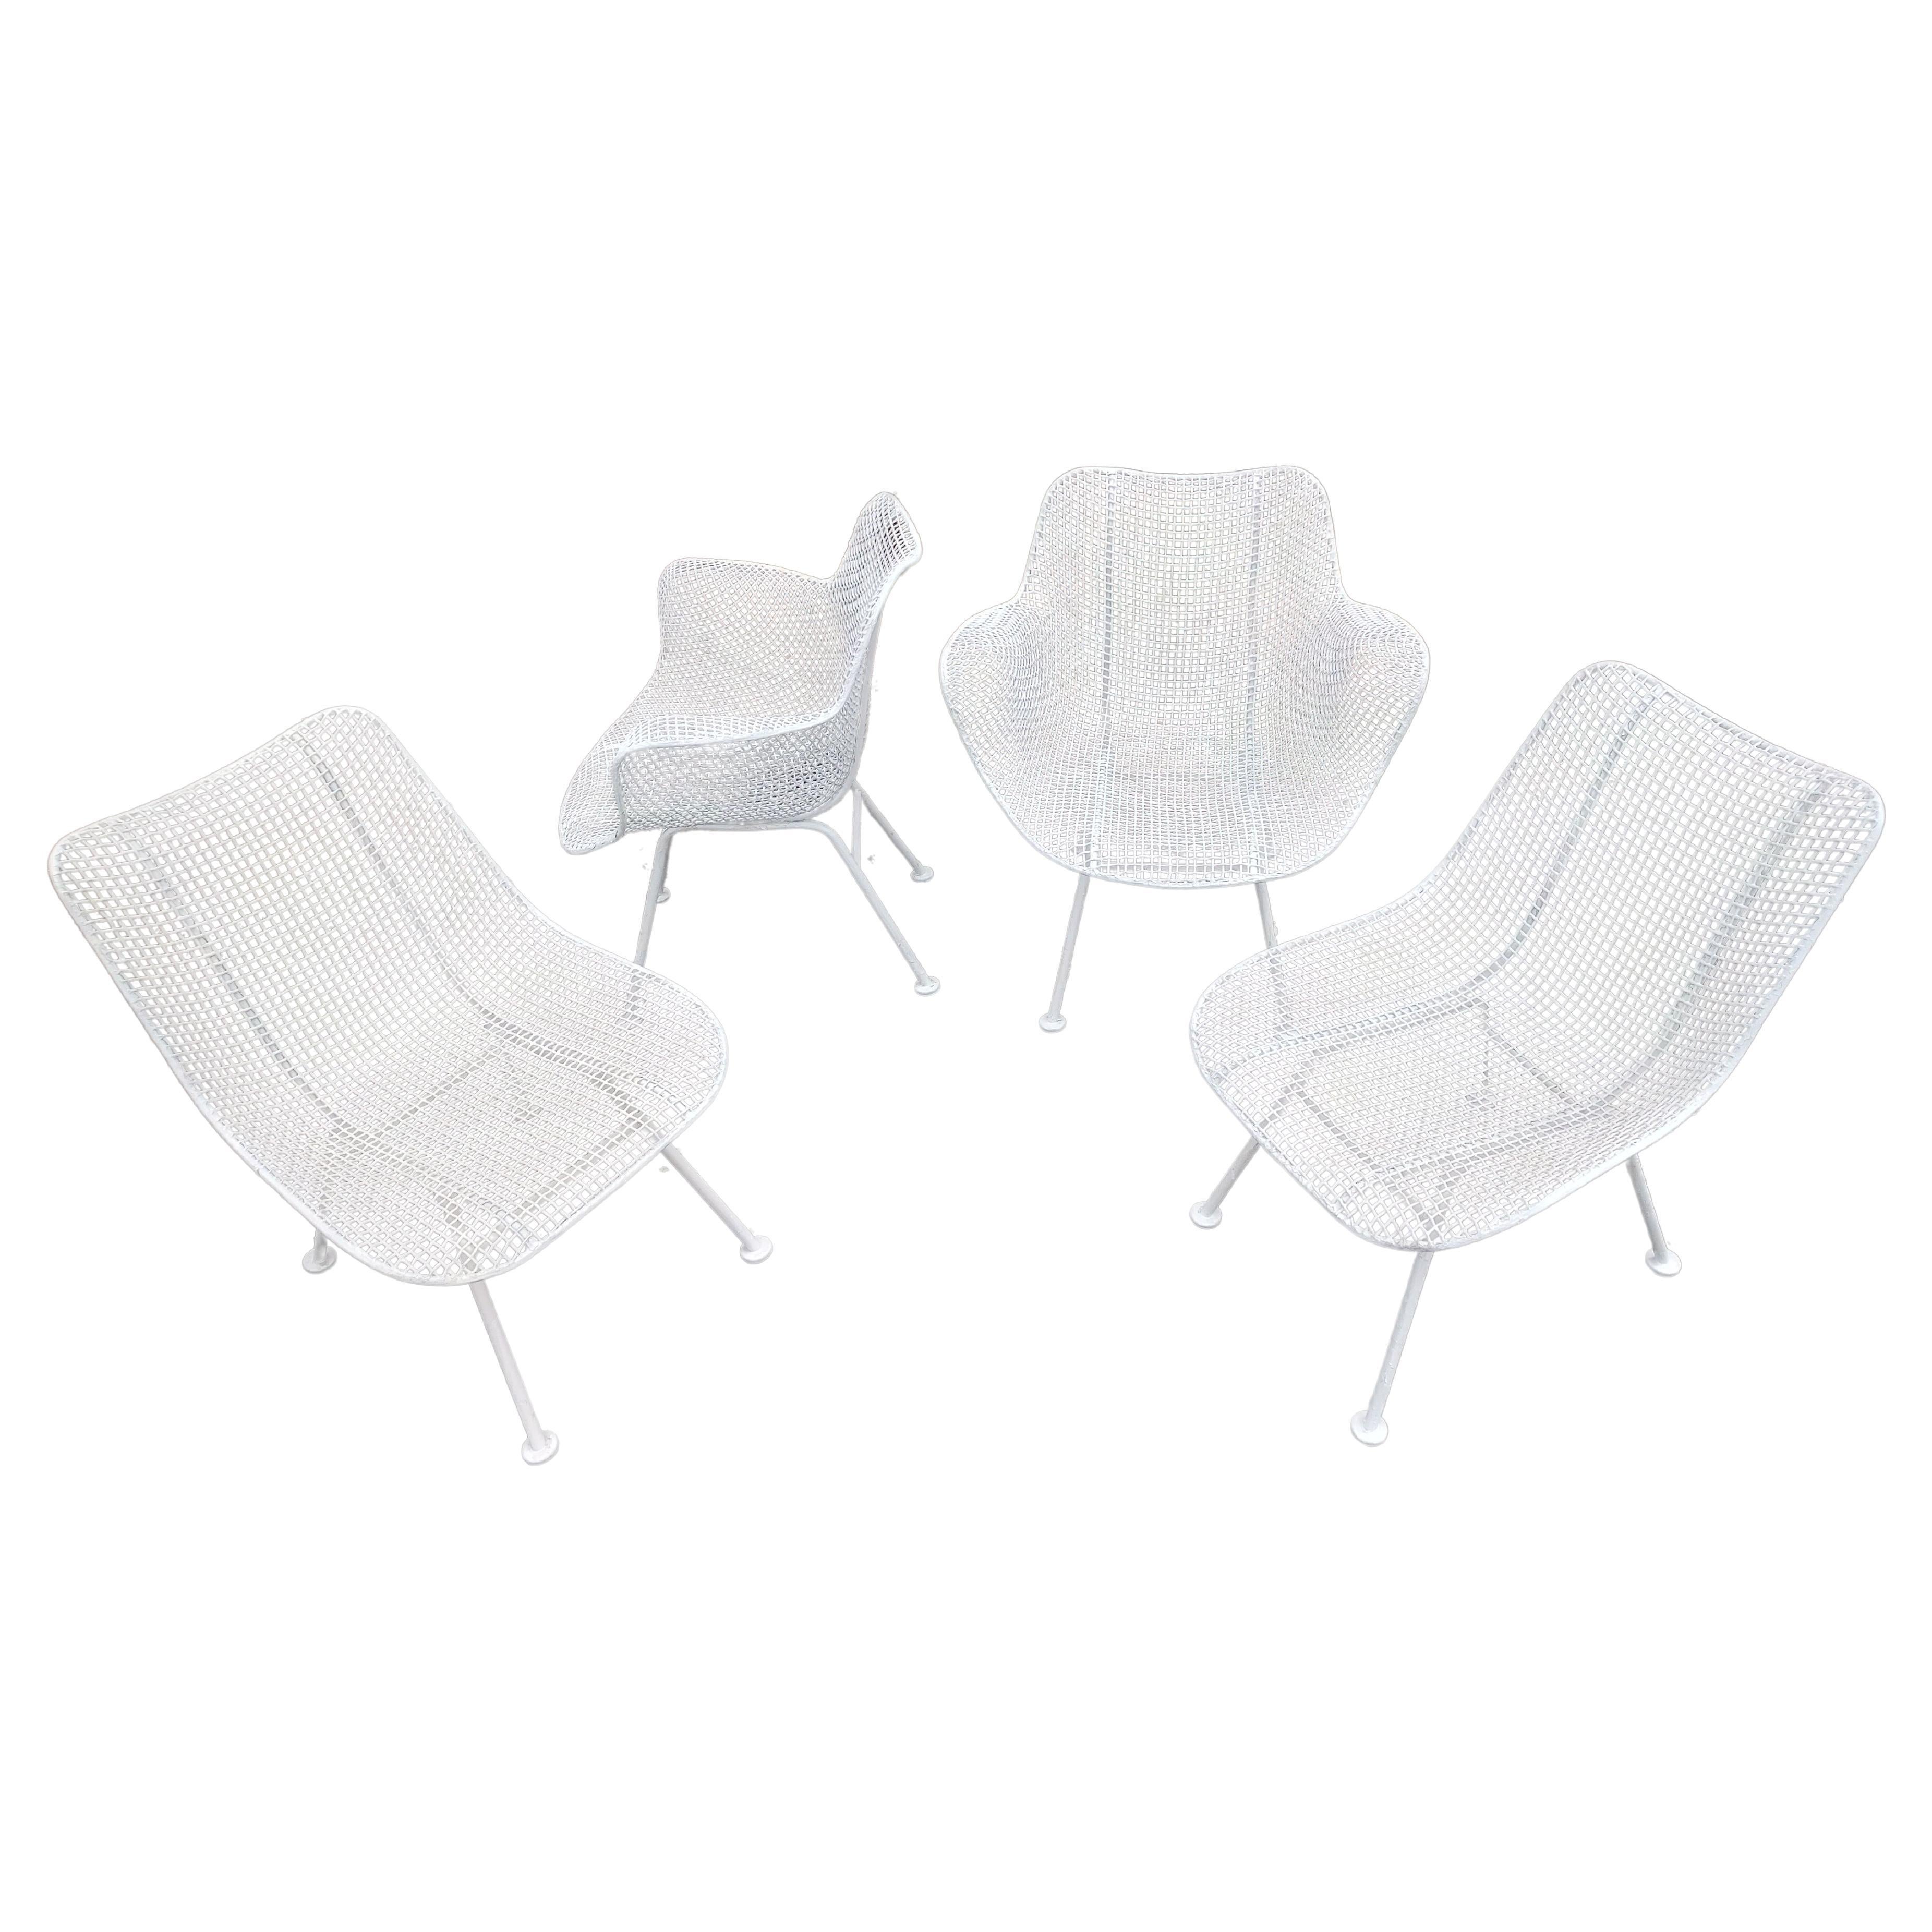 Fabulous set of 4 original Sculptura chairs, 2 arm, 2 side in white paint. Molded mesh which conforms to the body. In excellent vintage condition with minimal wear and lots of coatings for protection. Recently sprayed. Priced and sold as a set of 4.